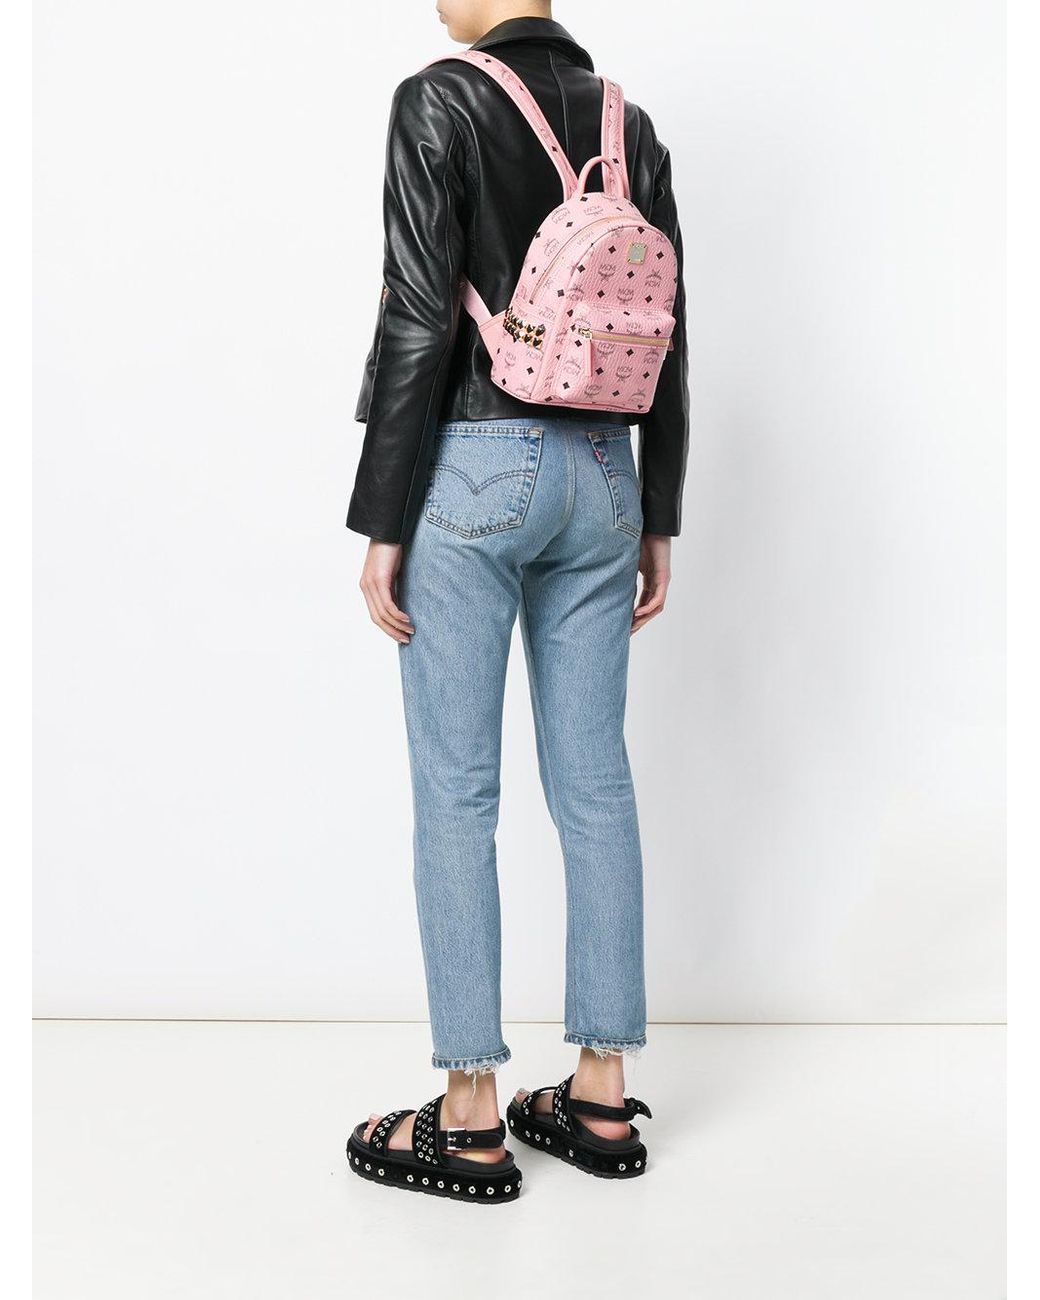 Arriba 55+ imagen mcm backpack outfit - Abzlocal.mx